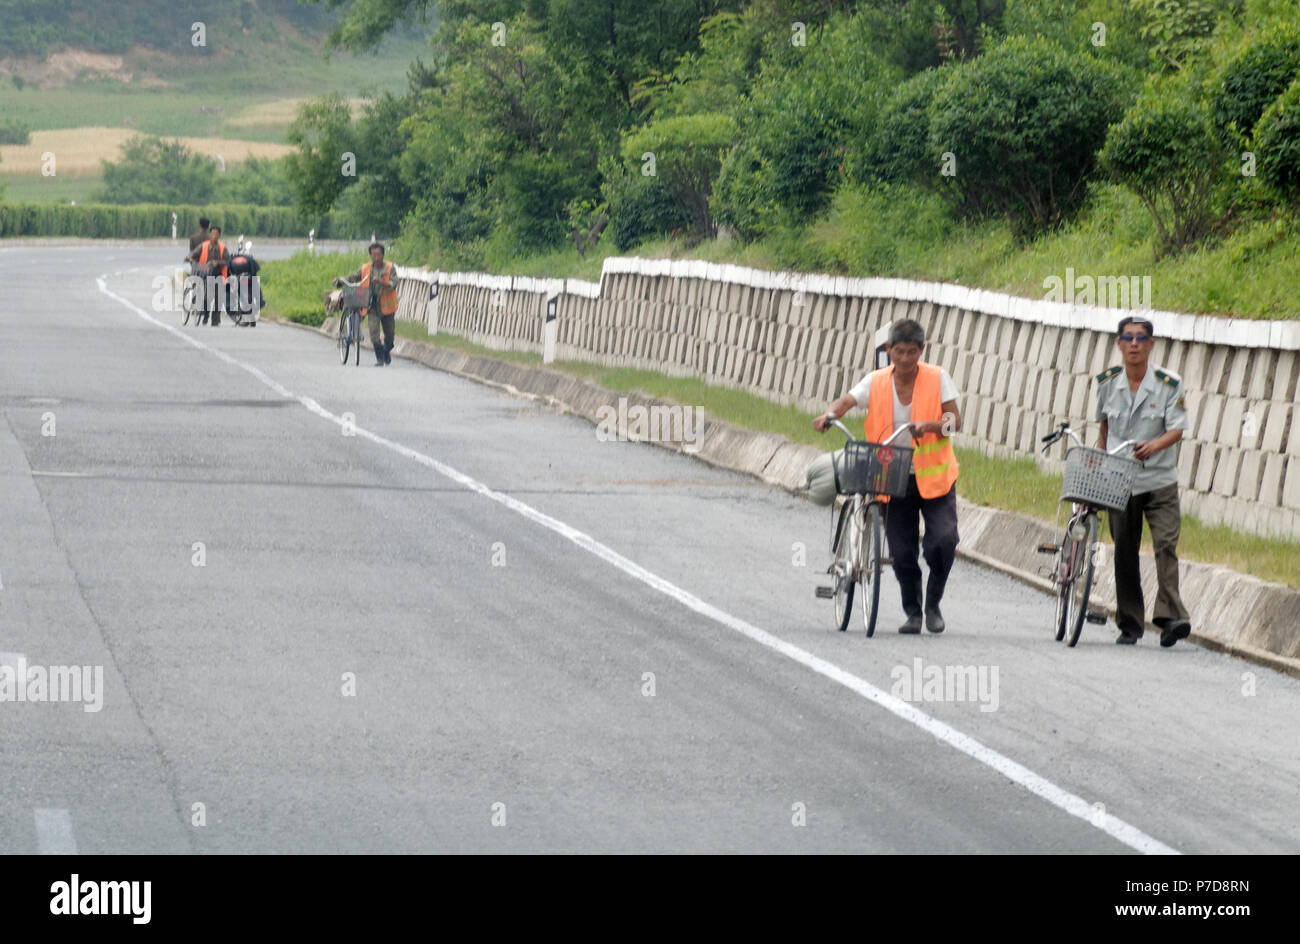 North Korean men pushing bicycles along the hard shoulder reservation of an empty motorway the Kaesong highway south of Pyongyang, North Korea Stock Photo